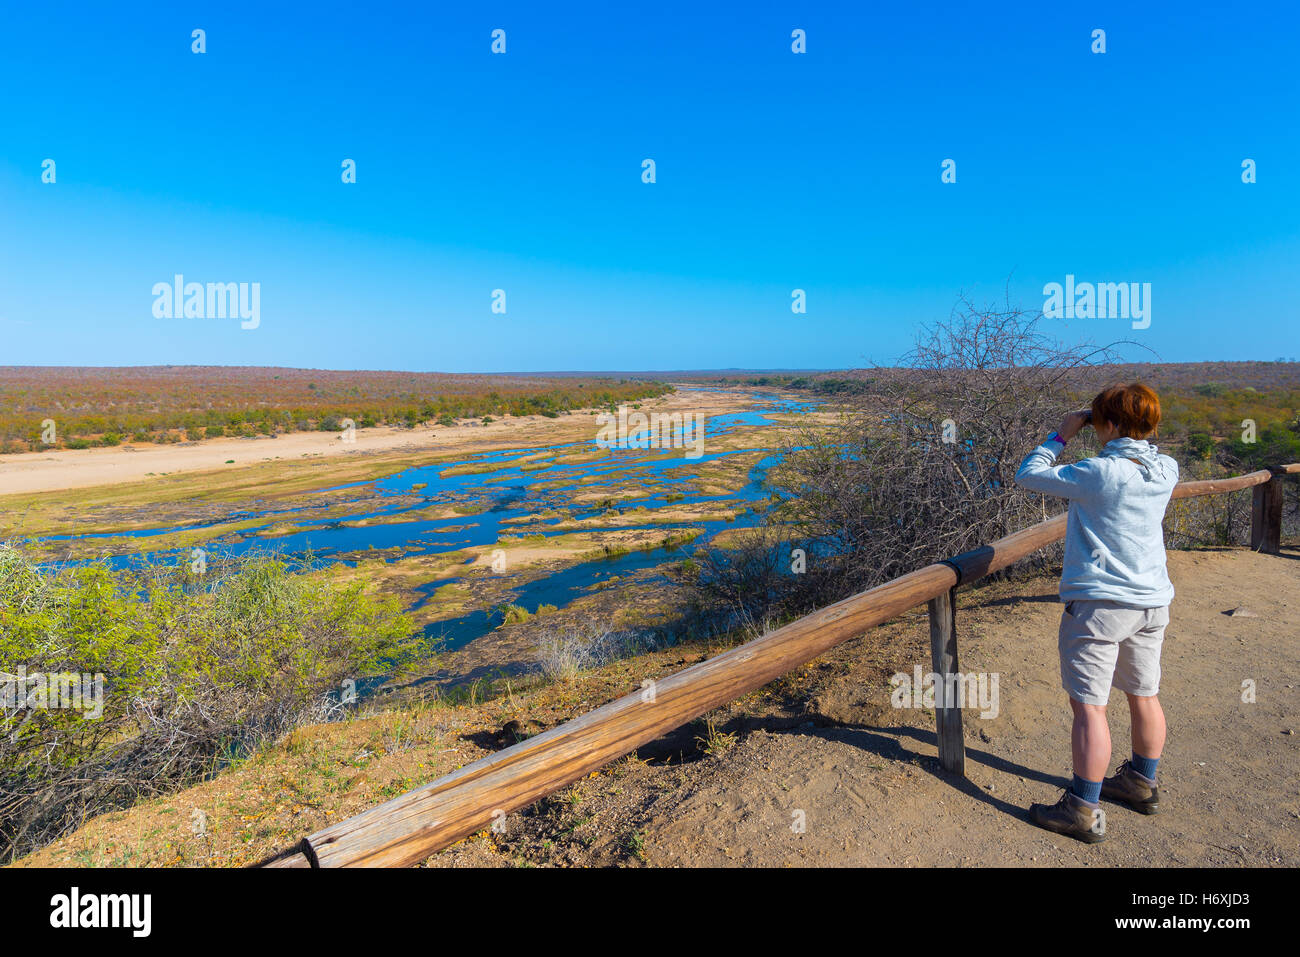 Tourist looking at panorama with binocular from viewpoint over the Olifants river, scenic and colorful landscape with wildlife i Stock Photo